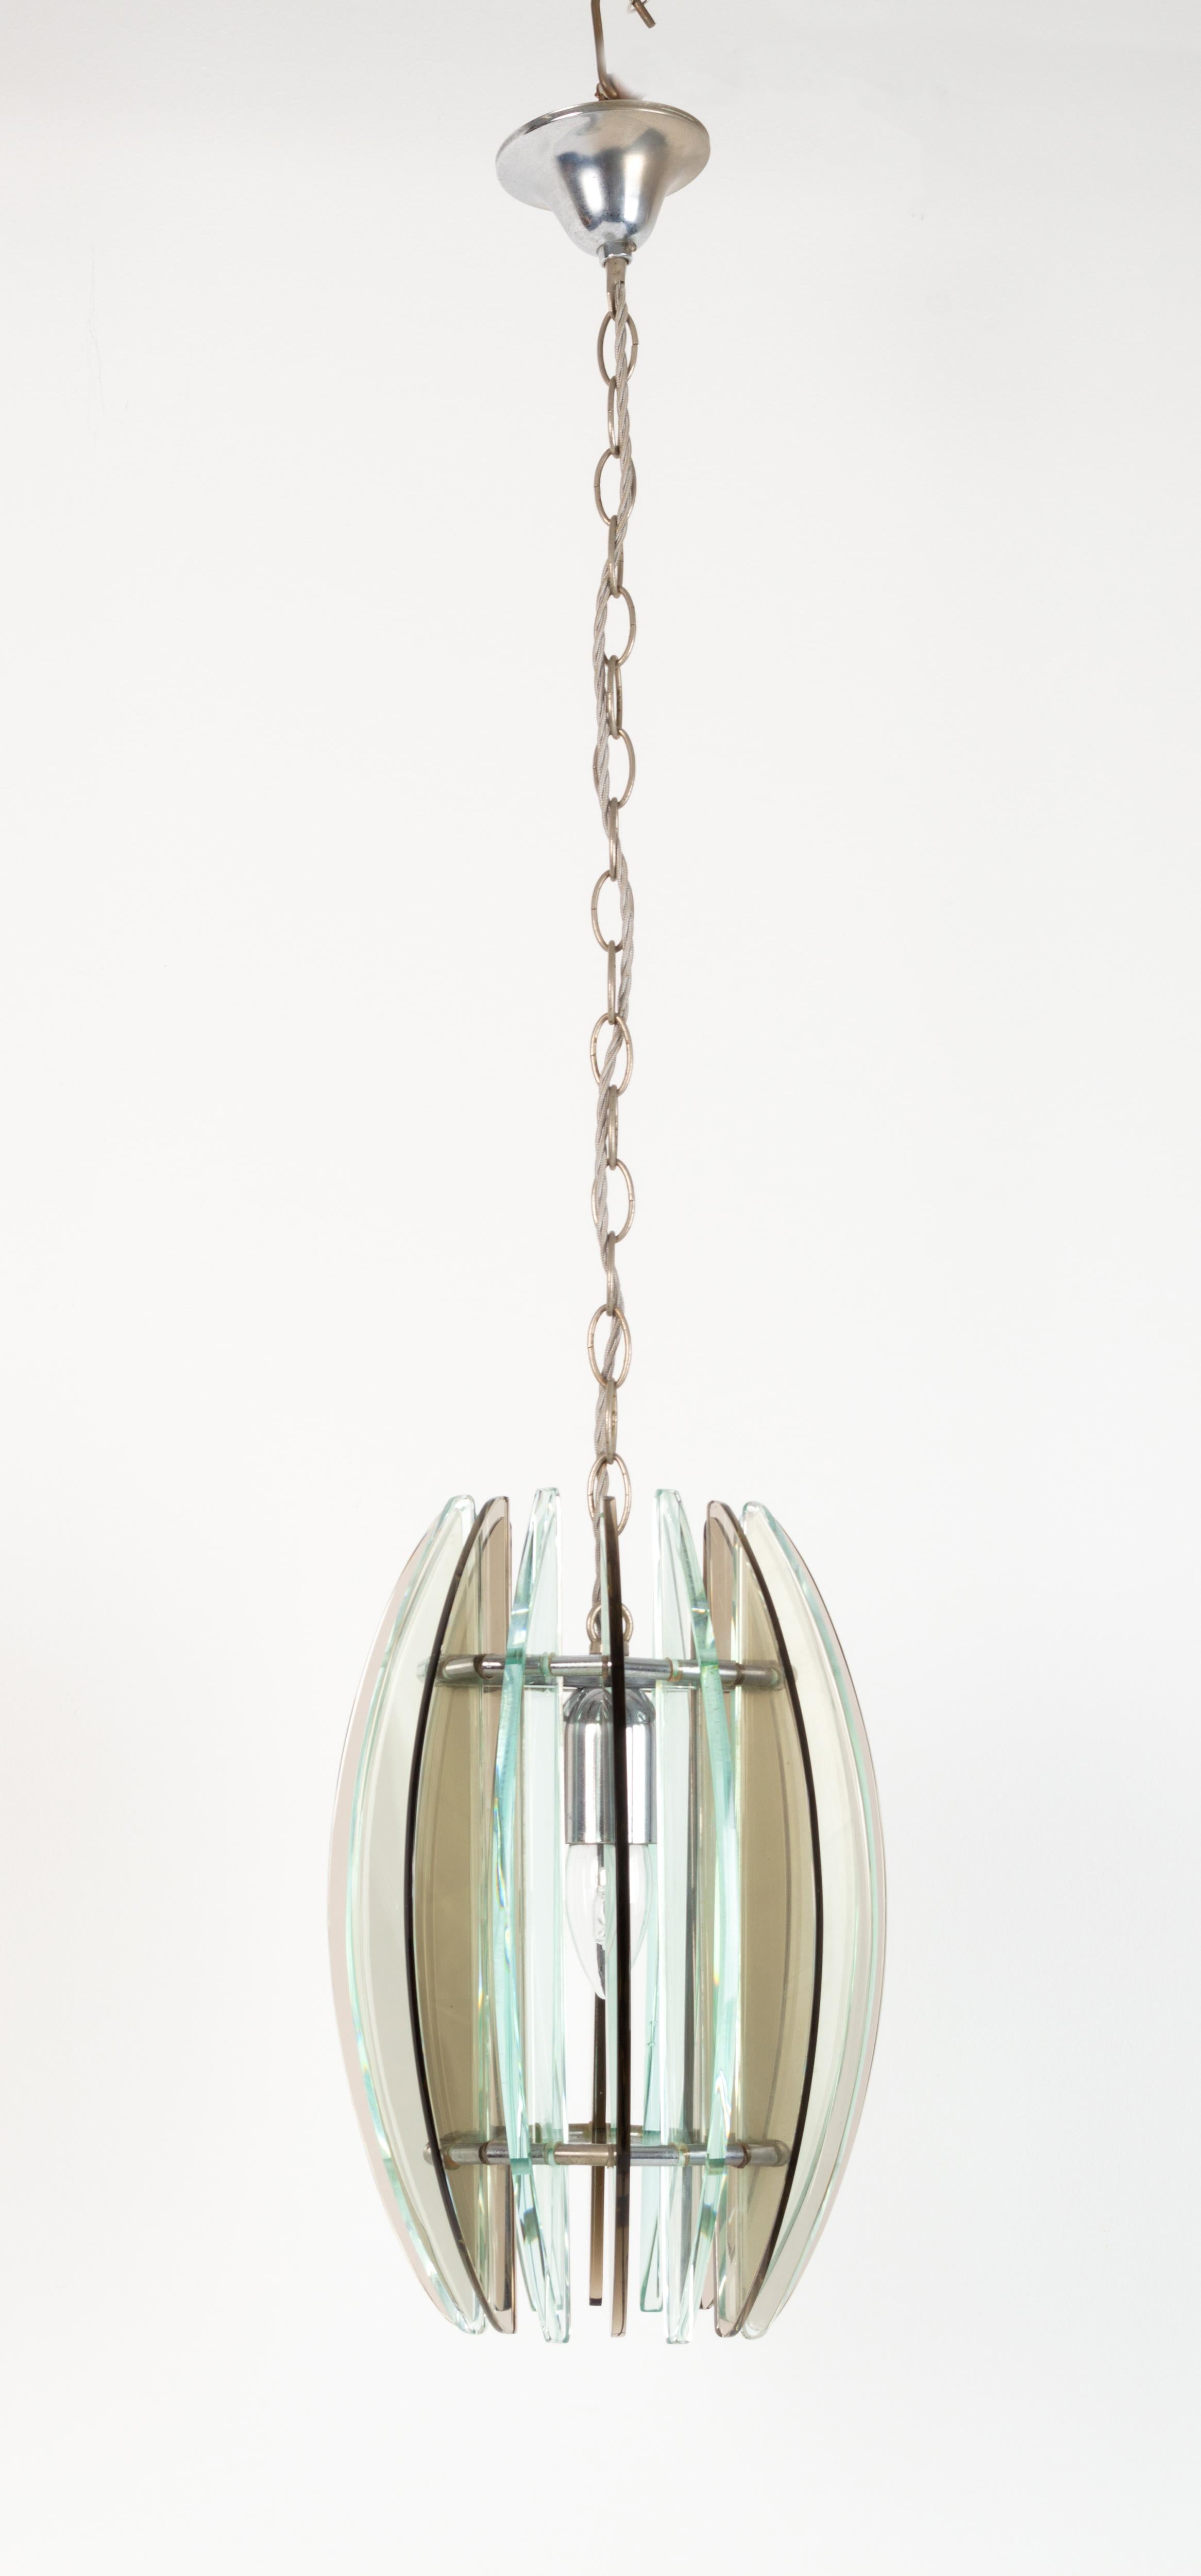 Mid-Century Modern Italian glass and nickel pendant light.
In the manner of Max Ingrand for Fontana Arte.
Thick green and smoked glass with a single central light source.

Excellent condition commensurate of age. Free from chips.
  